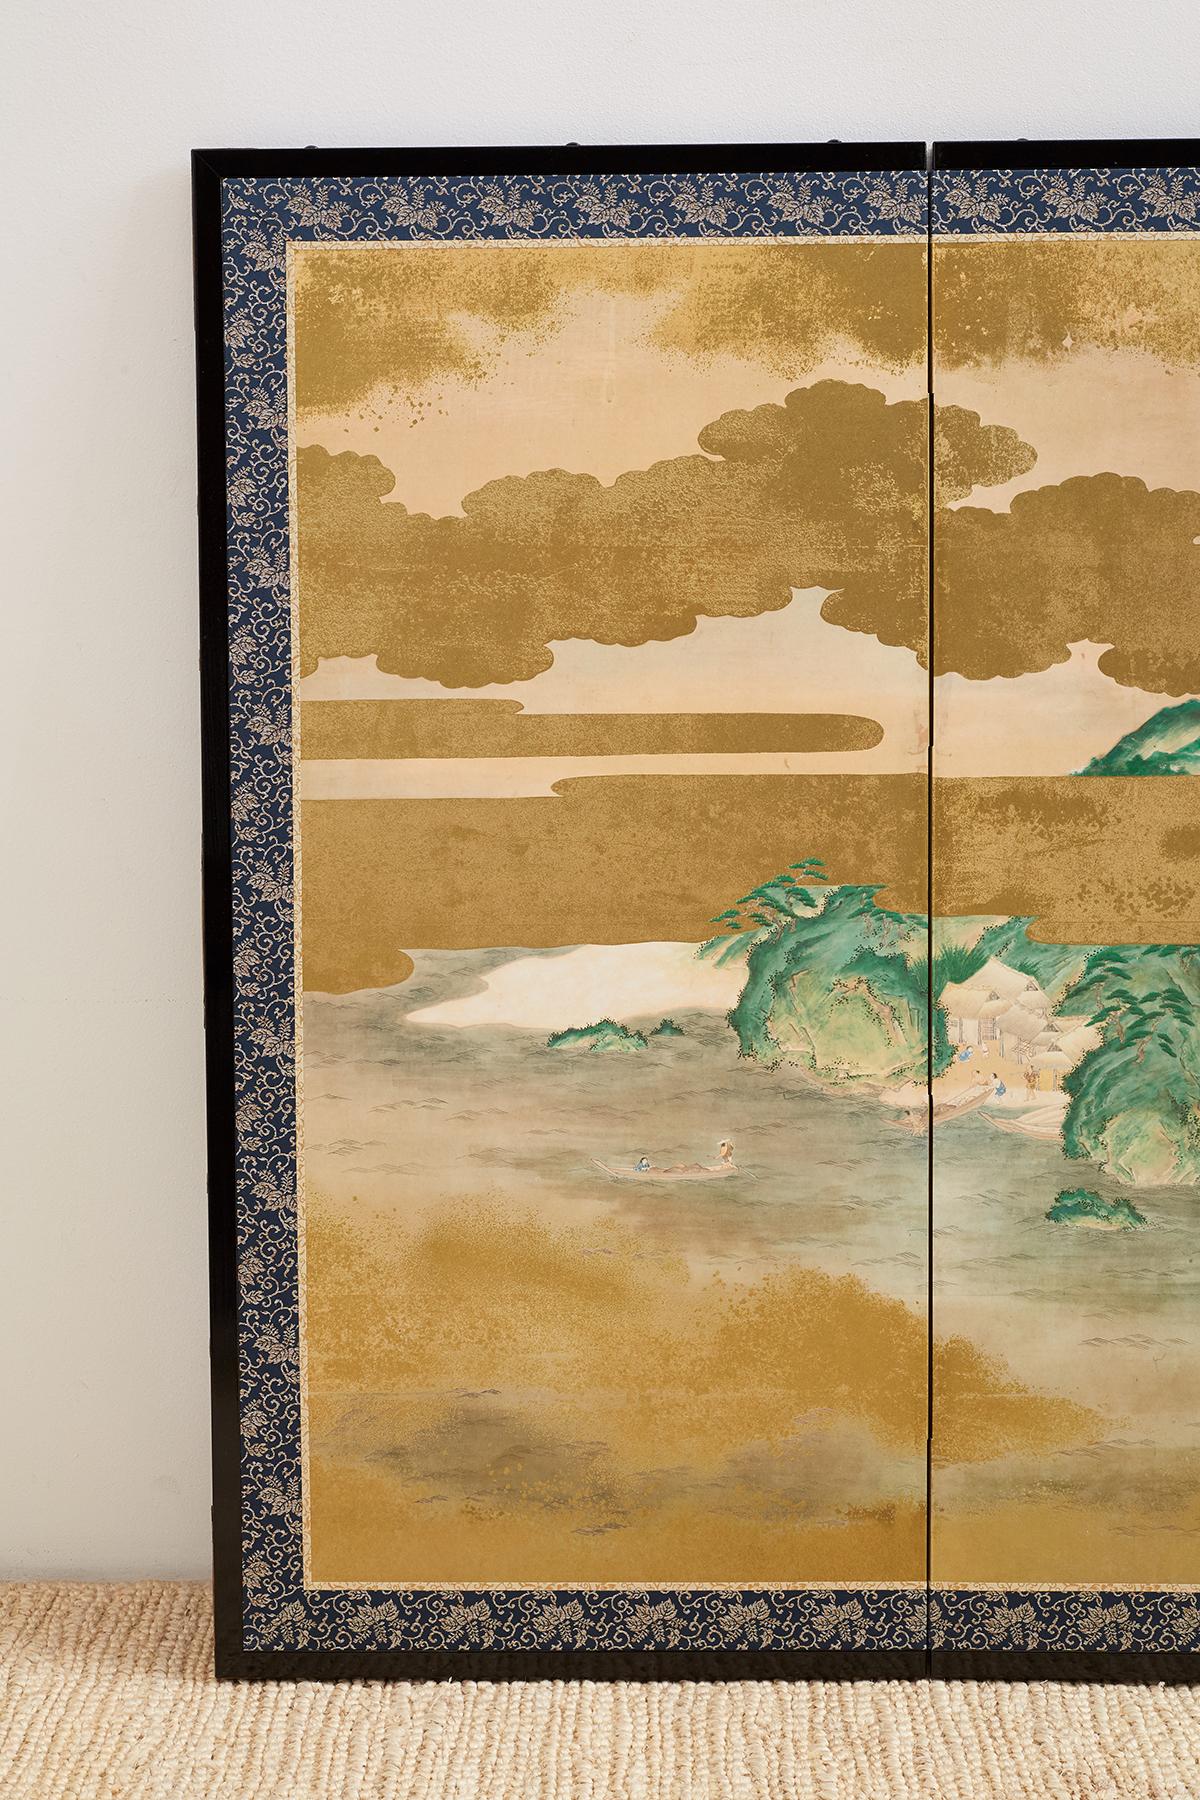 Large Japanese six-panel Byobu screen depicting an aerial view of a village with a river and mountain background. Painted in the Kano school style appearing to be from a narrative tale. Intricately painted villagers among houses and pagodas with